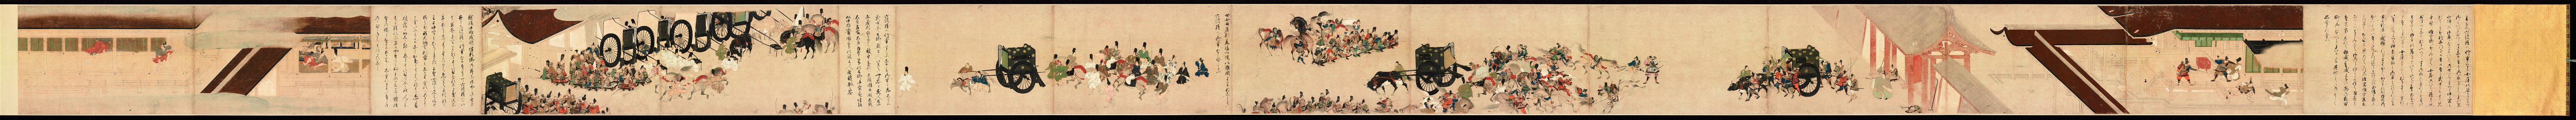 Illustrated Tale of the Heiji Civil War ： Scroll of the Imperial Visit to Rokuhara - Google Art Project. Free illustration for personal and commercial use.